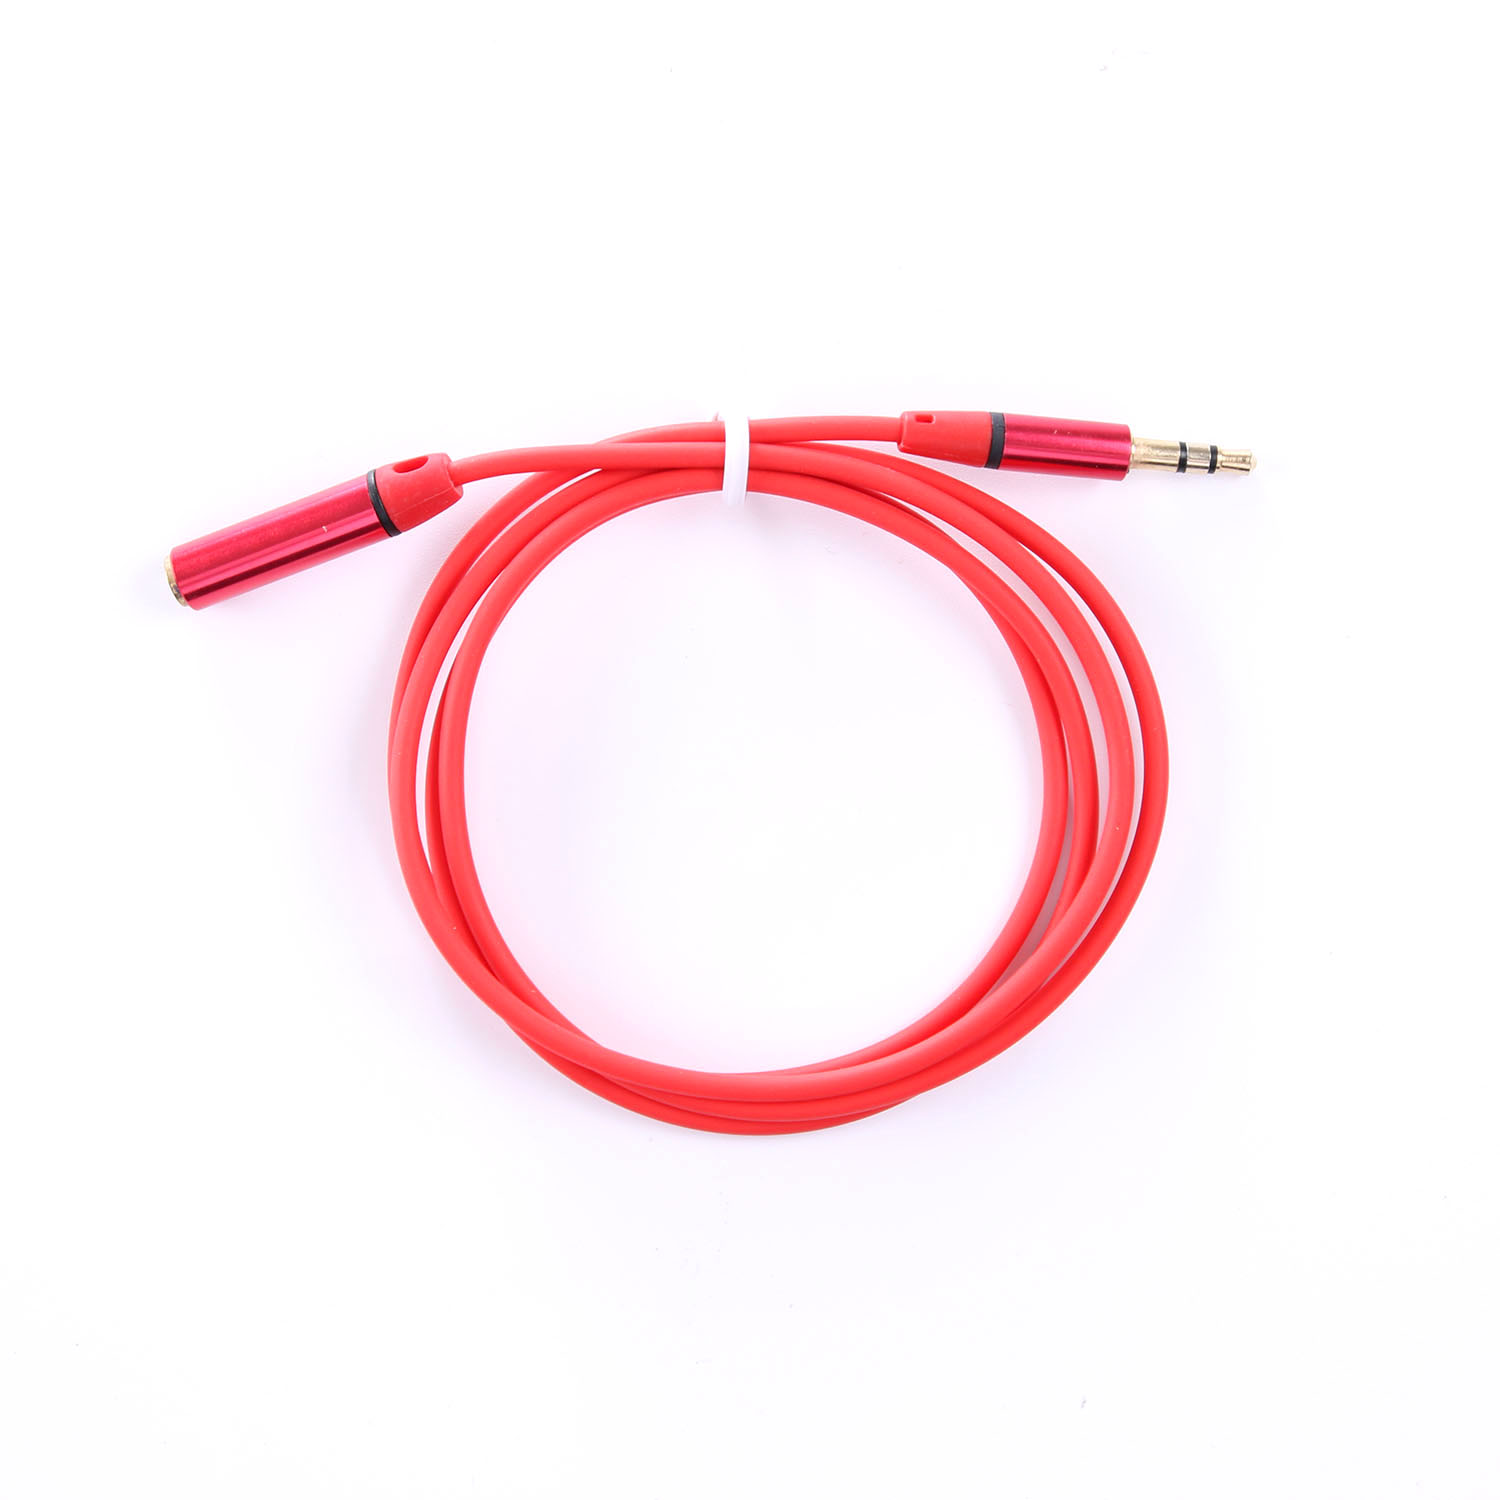 35mm-Male-To-Female-Stereo-Audio-Aux-Headphone-Extension-Cable-1m-For-Mobile-Phone-MP3-Tablet-1231514